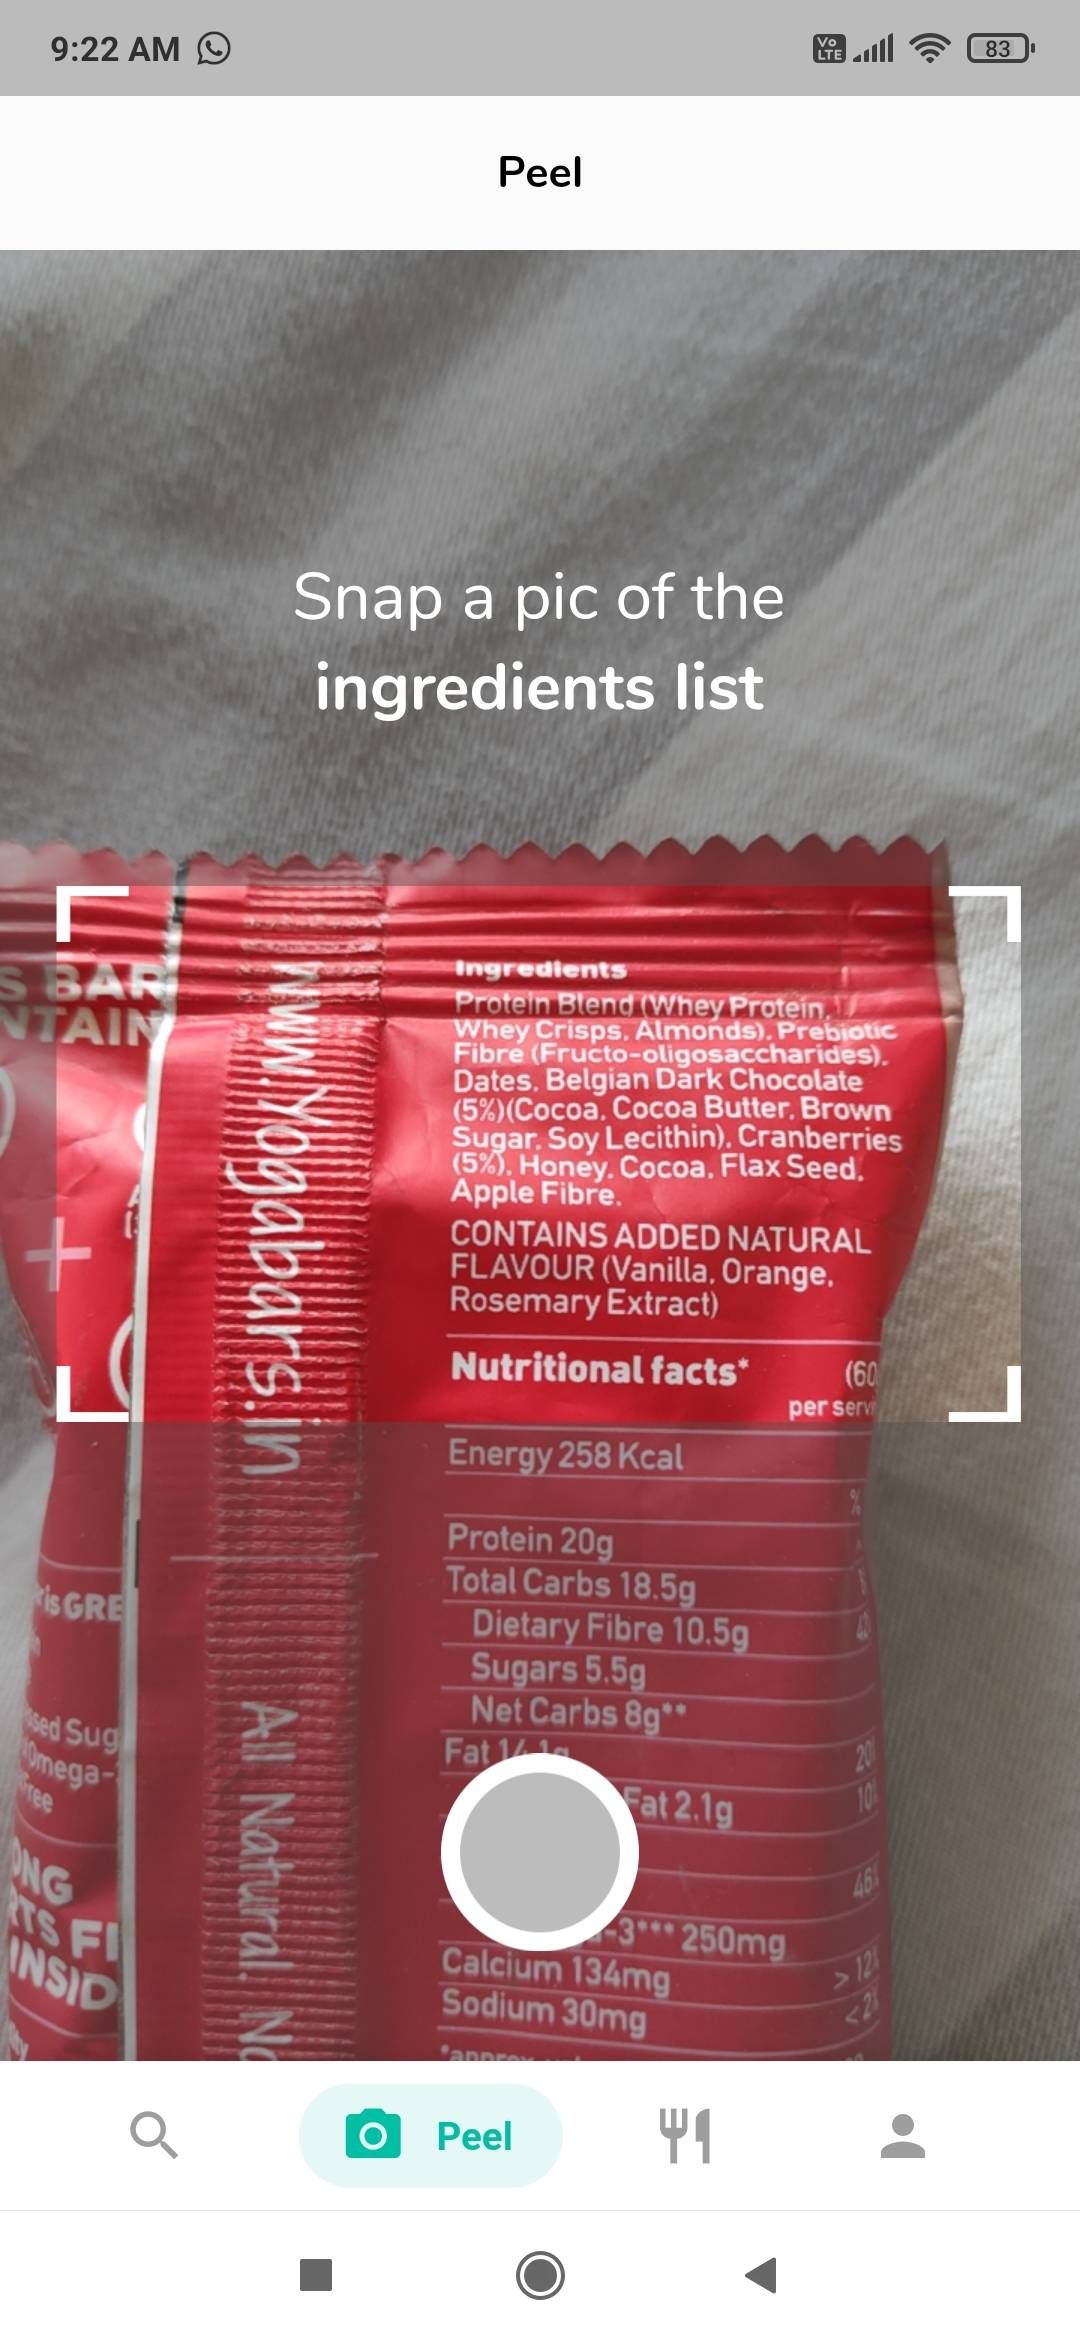 Take a photo of the ingredients list of any packaged food product